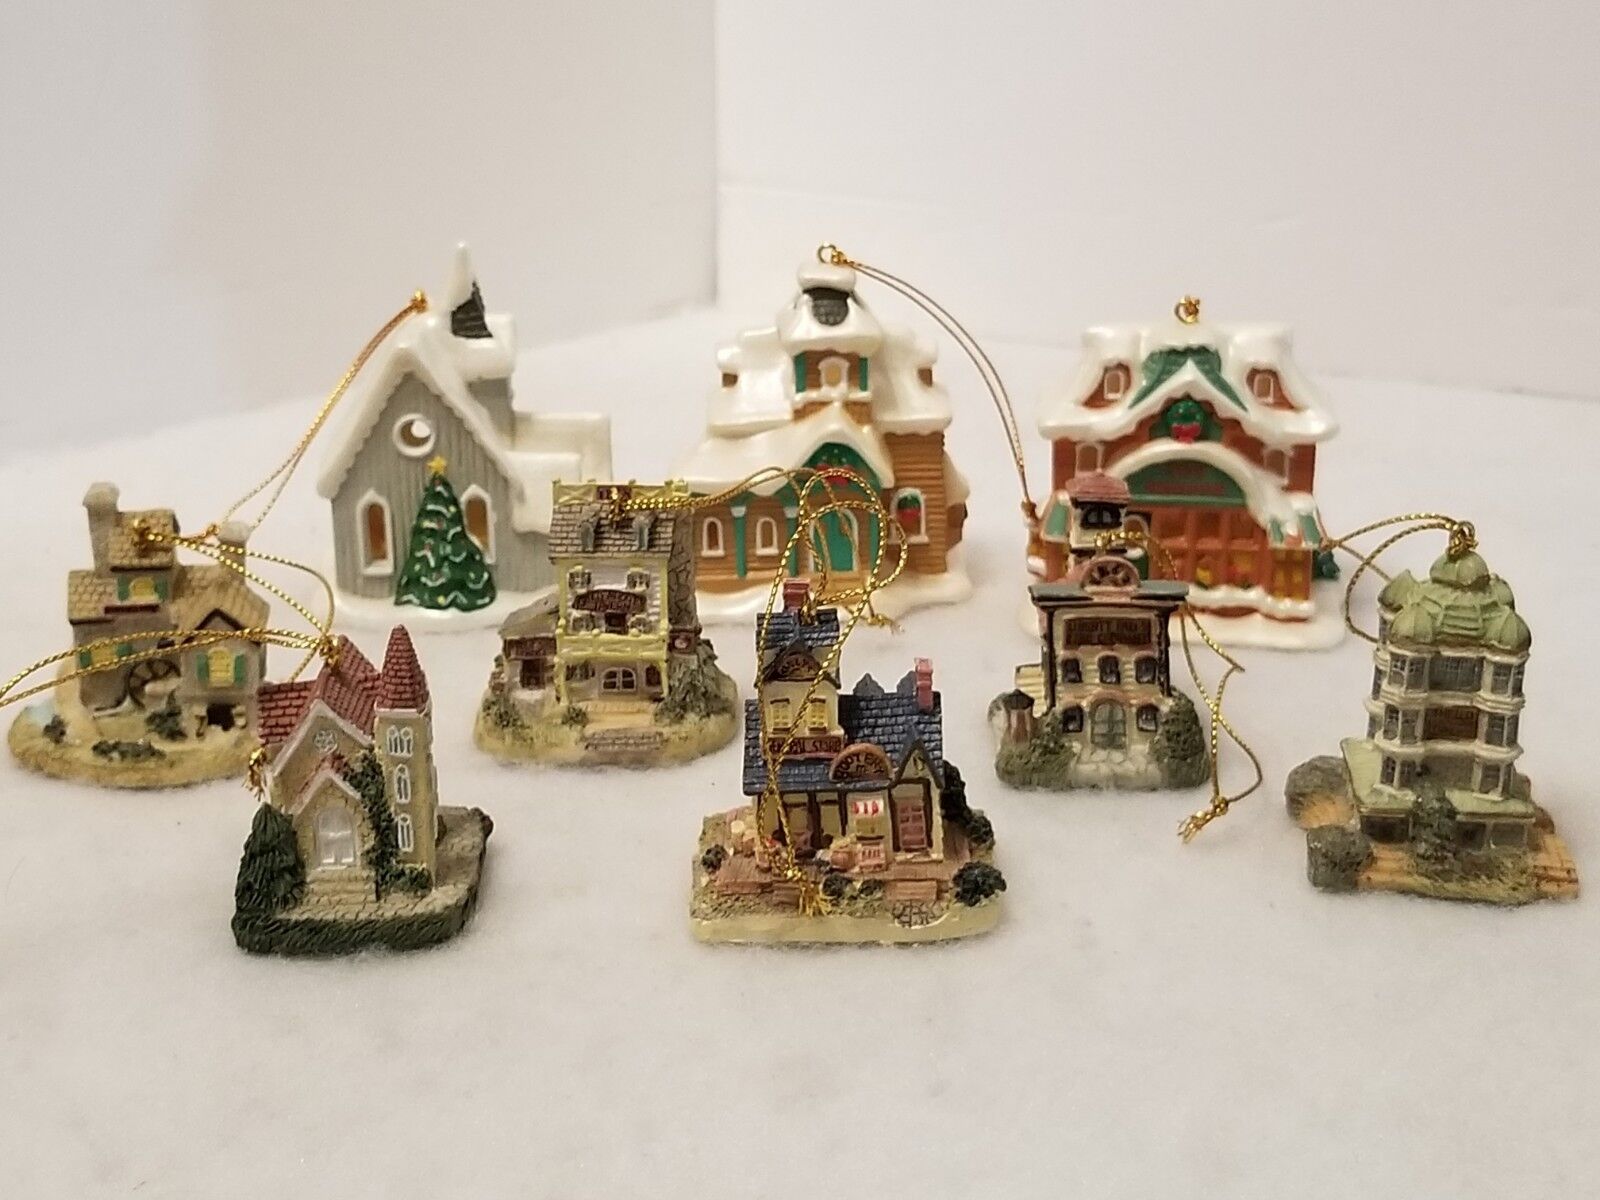 LOT OF 6 VINTAGE INTERNATIONAL RESOURCING HAND PAINTED BLDG CHRISTMAS ORNAMENTS